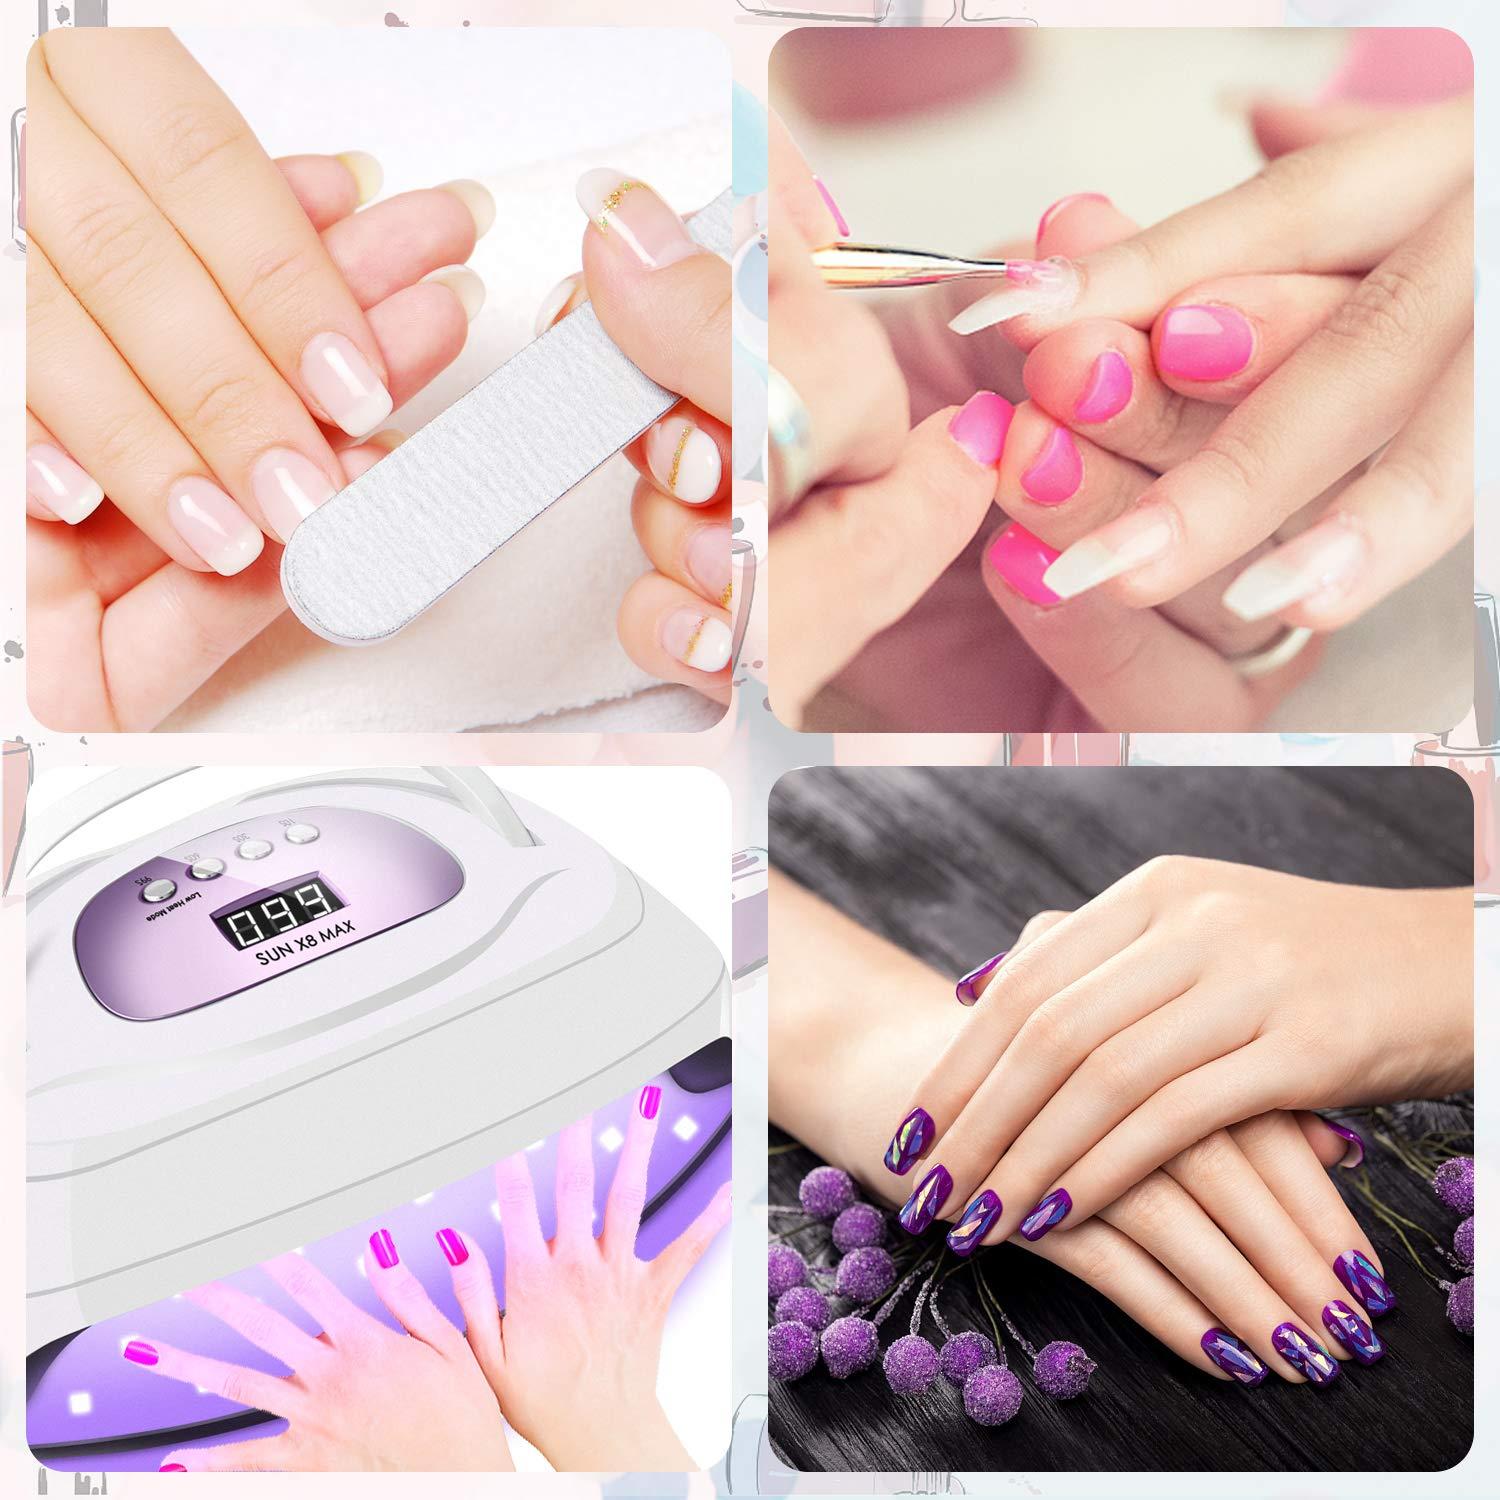 UV Gel Nail Lamp,150W UV Nail Dryer LED Light for Gel Polish-4 Timers  Professional Nail Art Accessories,Curing Gel Toe Nails 